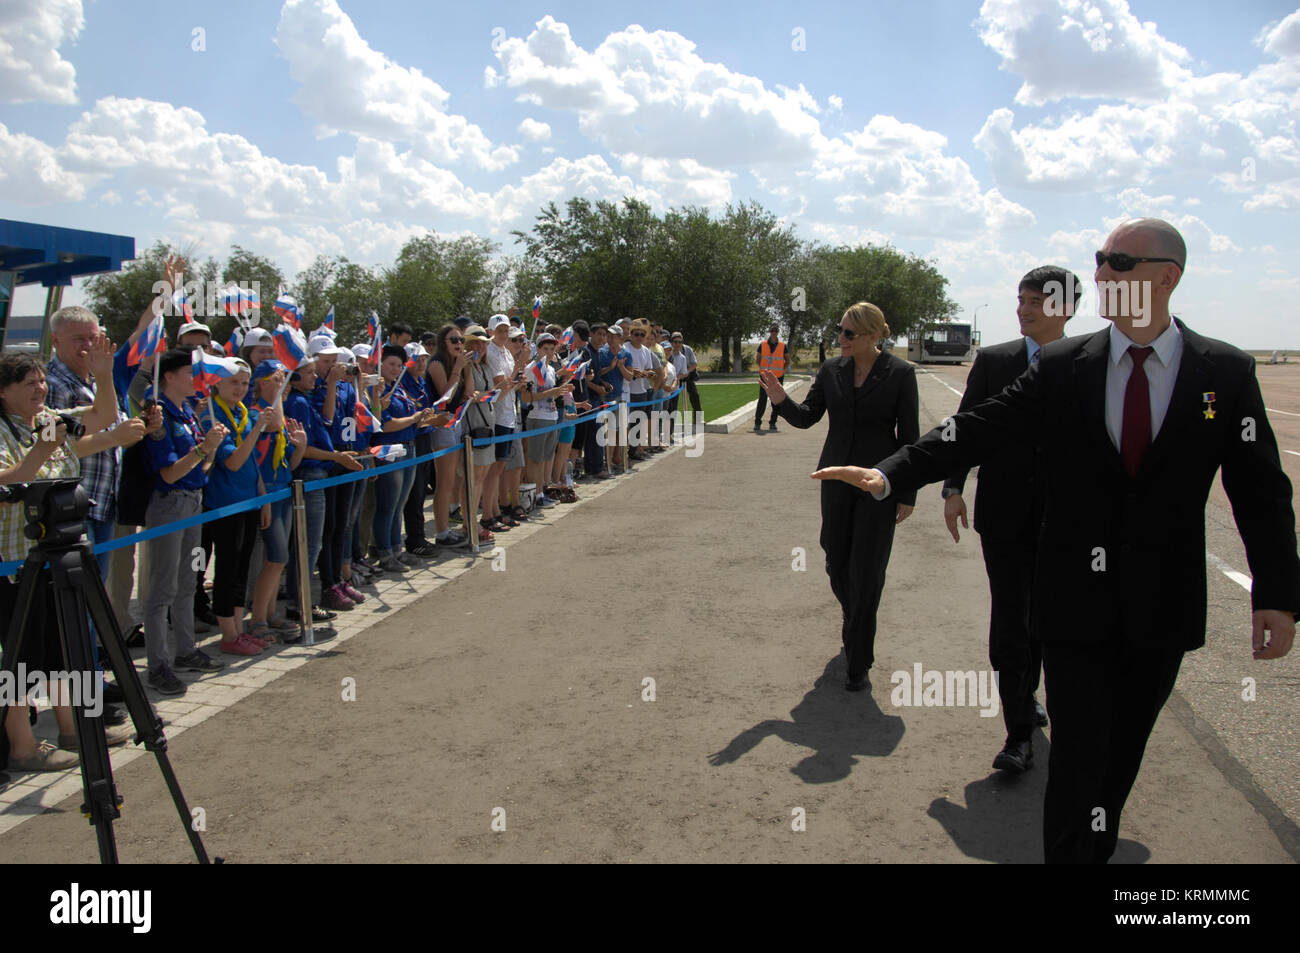 ISS Expedition 48-49 prime crewmembers Kate Rubins of NASA (left), Takuya Onishi of the Japan Aerospace Exploration Agency (center) and Anatoly Ivanishin of Roscosmos (right) wave to schoolchildren after arriving in Baikonur, Kazakhstan June 24 for final pre-launch training following a flight from Star City, Russia. The trio will launch July 7 from the Baikonur Cosmodrome in Kazakhstan on the Soyuz MS-01 spacecraft for a planned four-month mission on the International Space Station.  NASA/Alexander Vysotsky Soyuz MS-01 crew members wave to schoolchildren after arriving in Baikonur Stock Photo